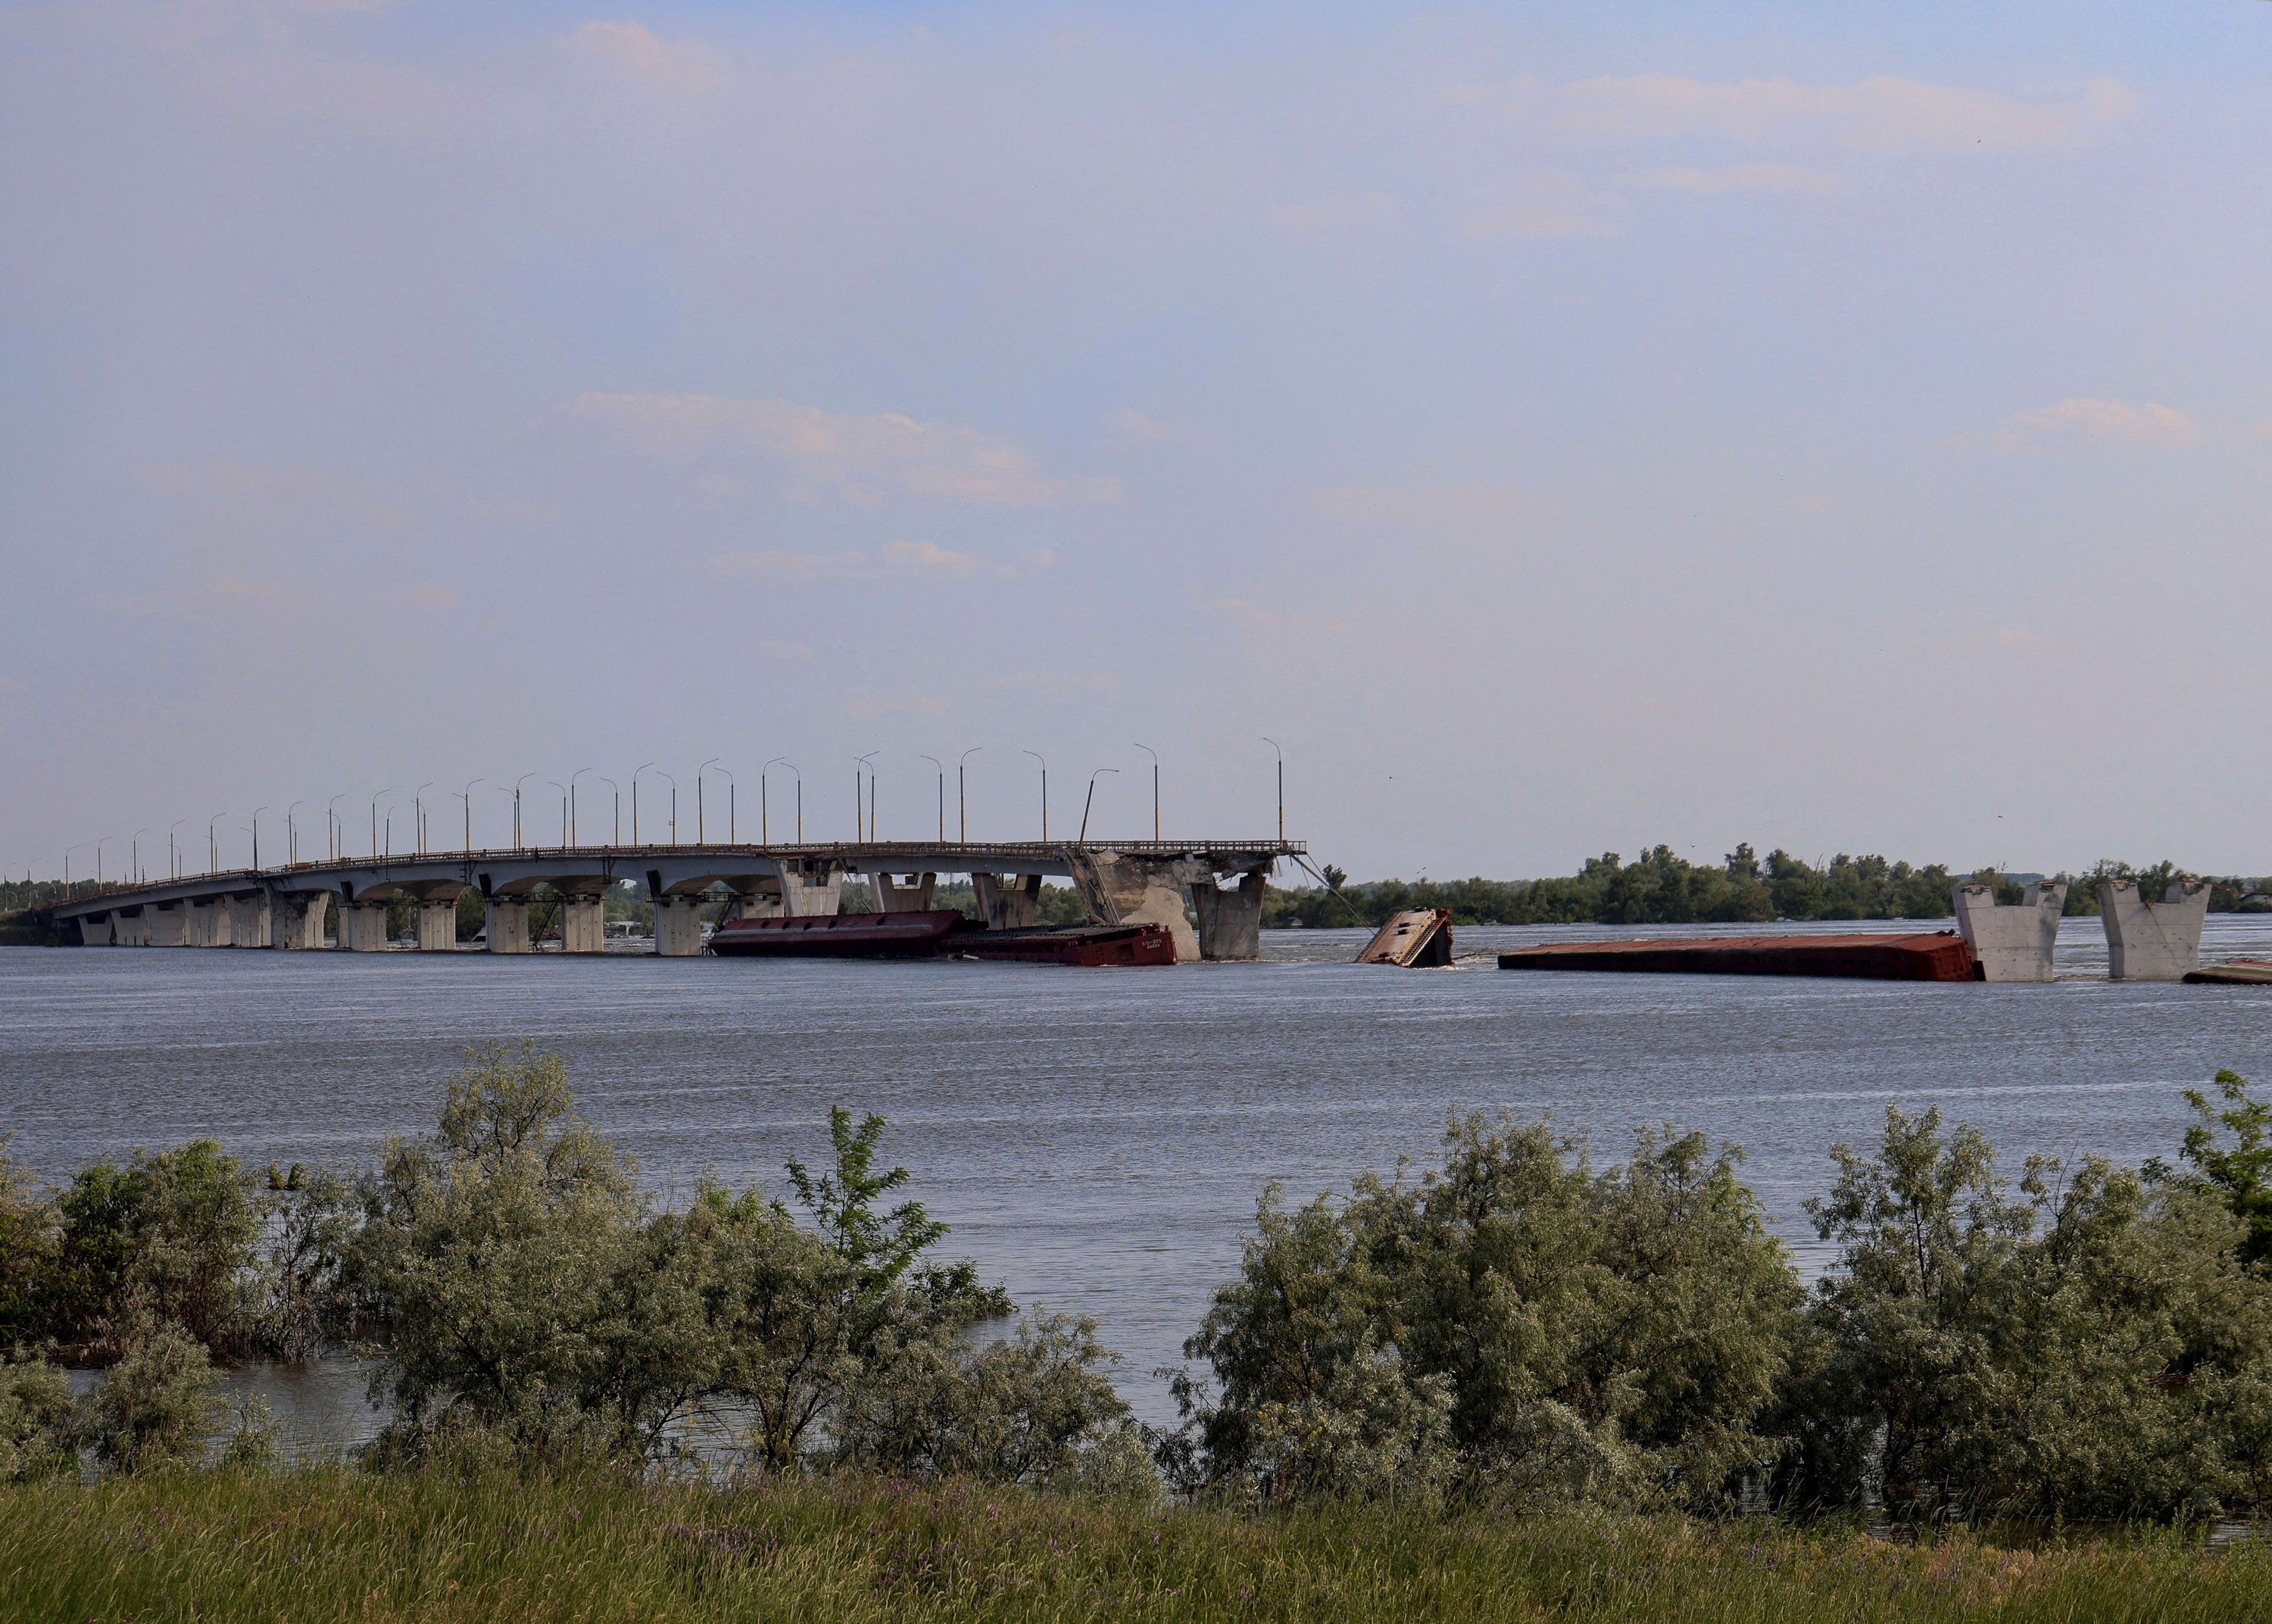 Ukrainian forces first established a bridgehead on the Russian-controlled east bank of the Dnipro River near the Antonivsky Bridge in June, as seen in this image from June 8.